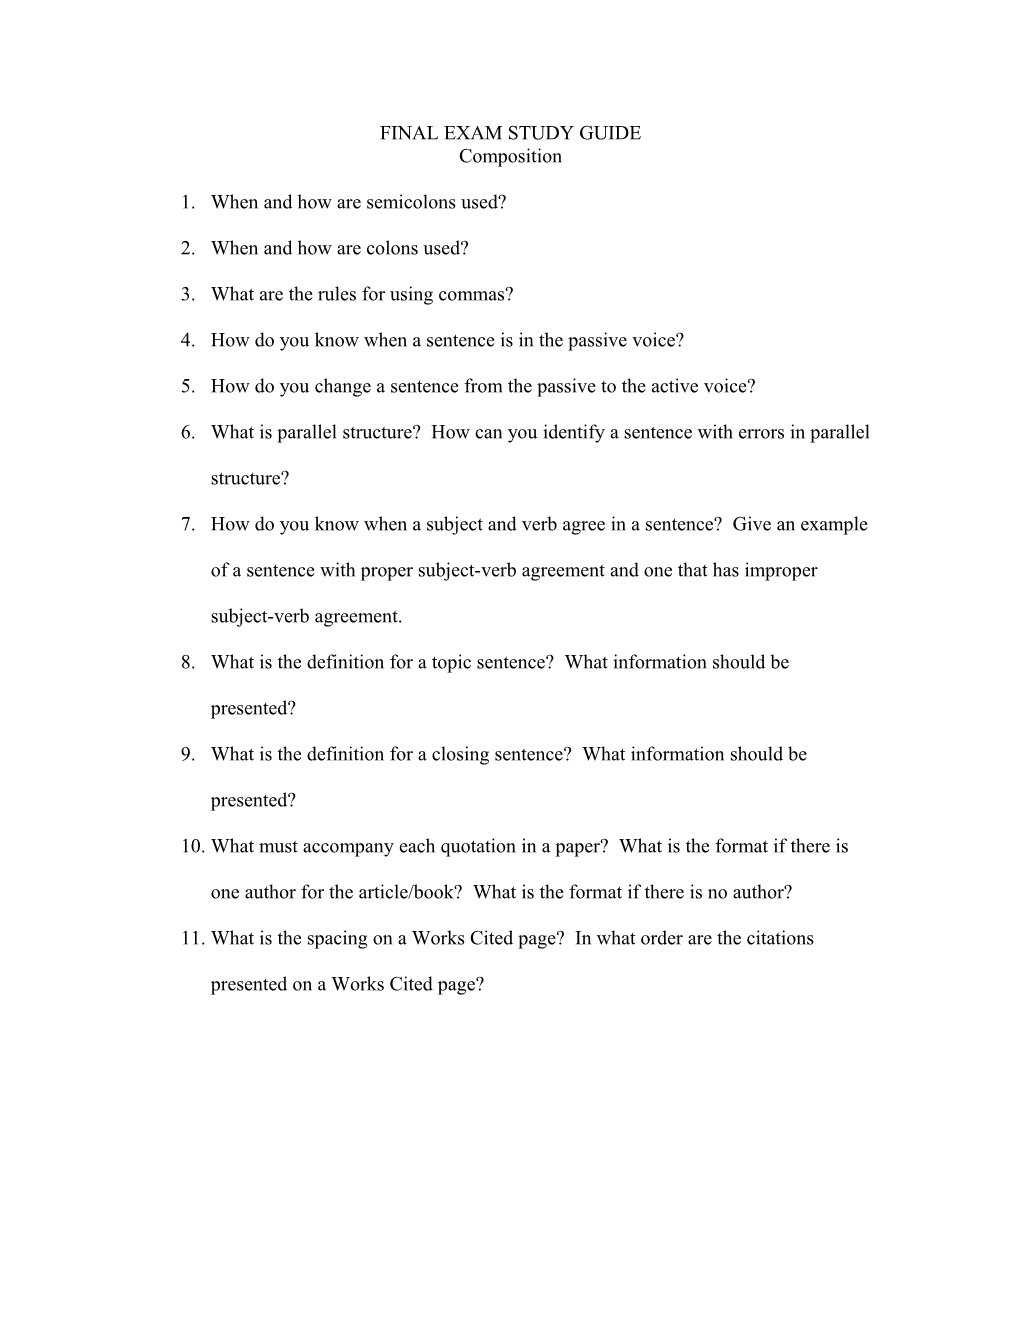 Comprehension Questions for Lamb to the Slaughter by Roald Dahl